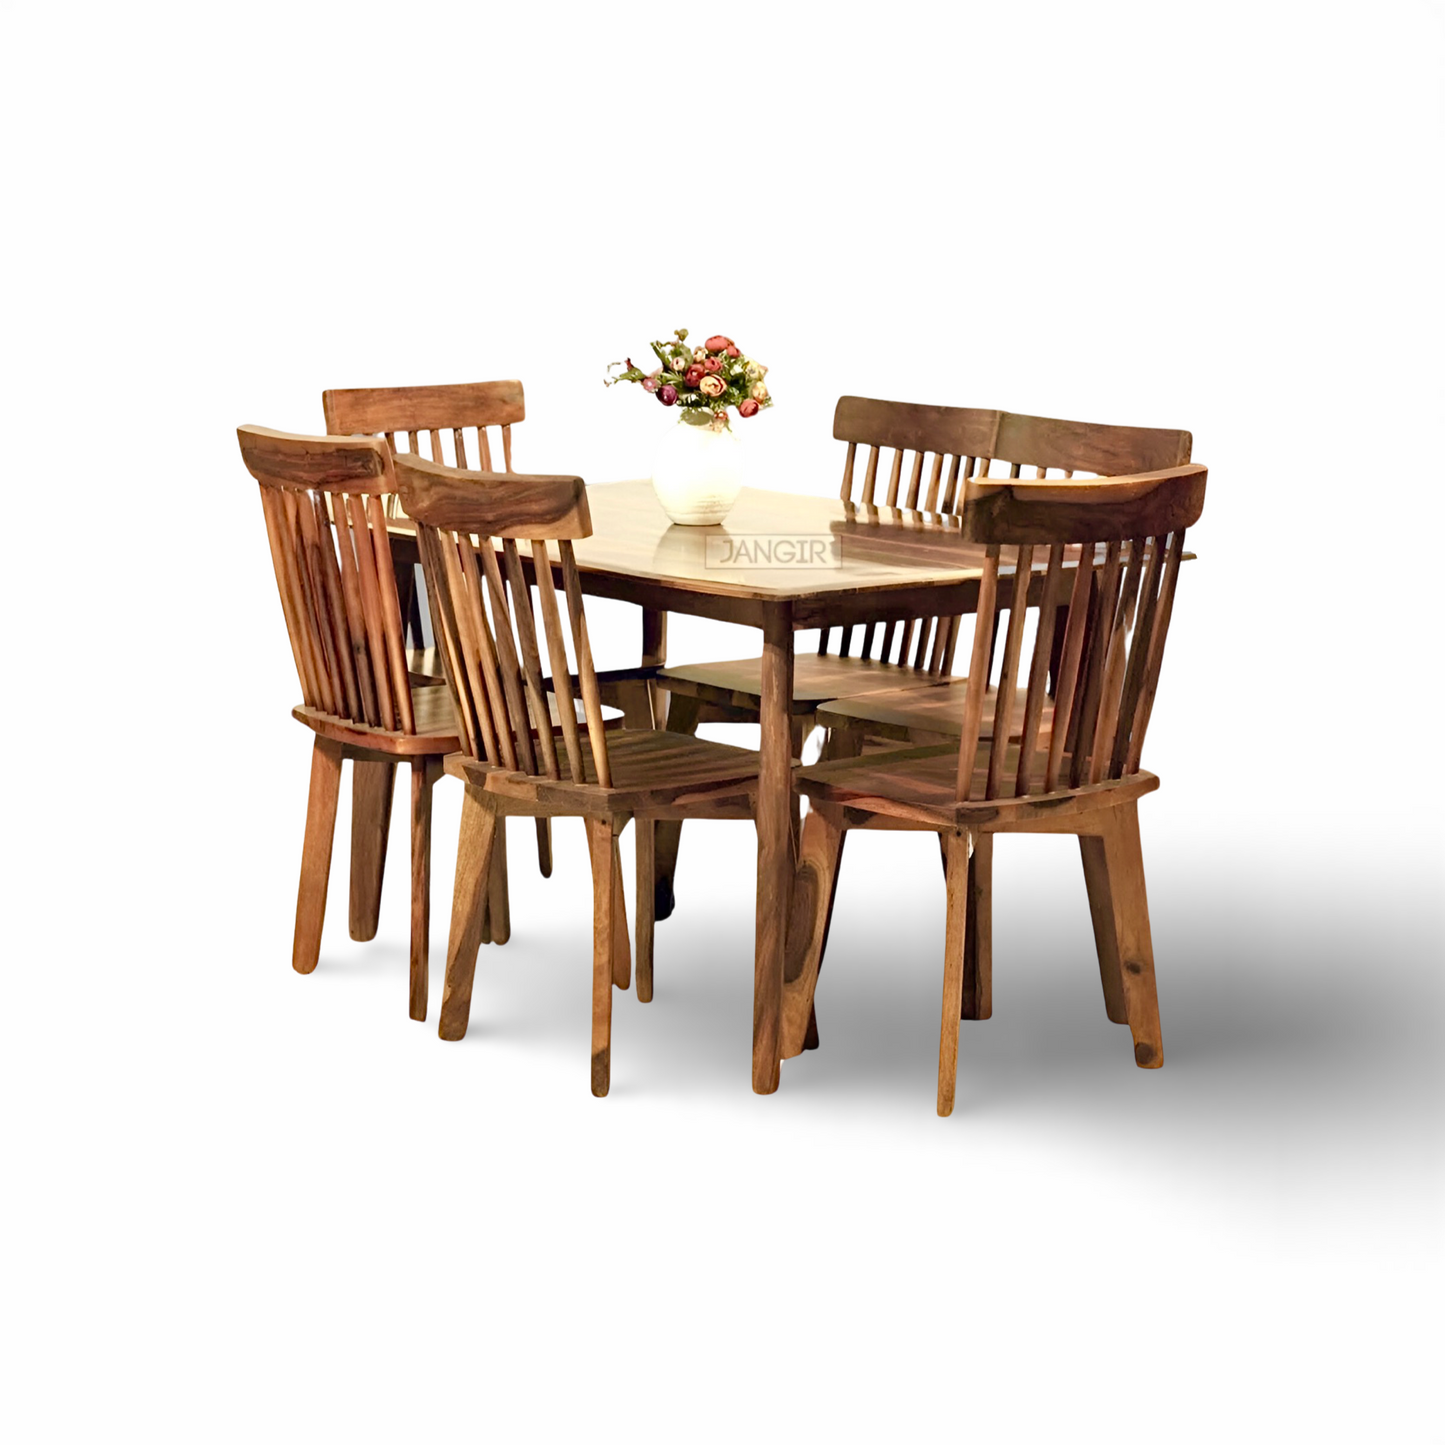 Upgrade  your dining space with our beautiful Alee Dining Set, crafted with Sheesham wood. Transform your space with this modern dining table set ! Buy online or in Bangalore now.